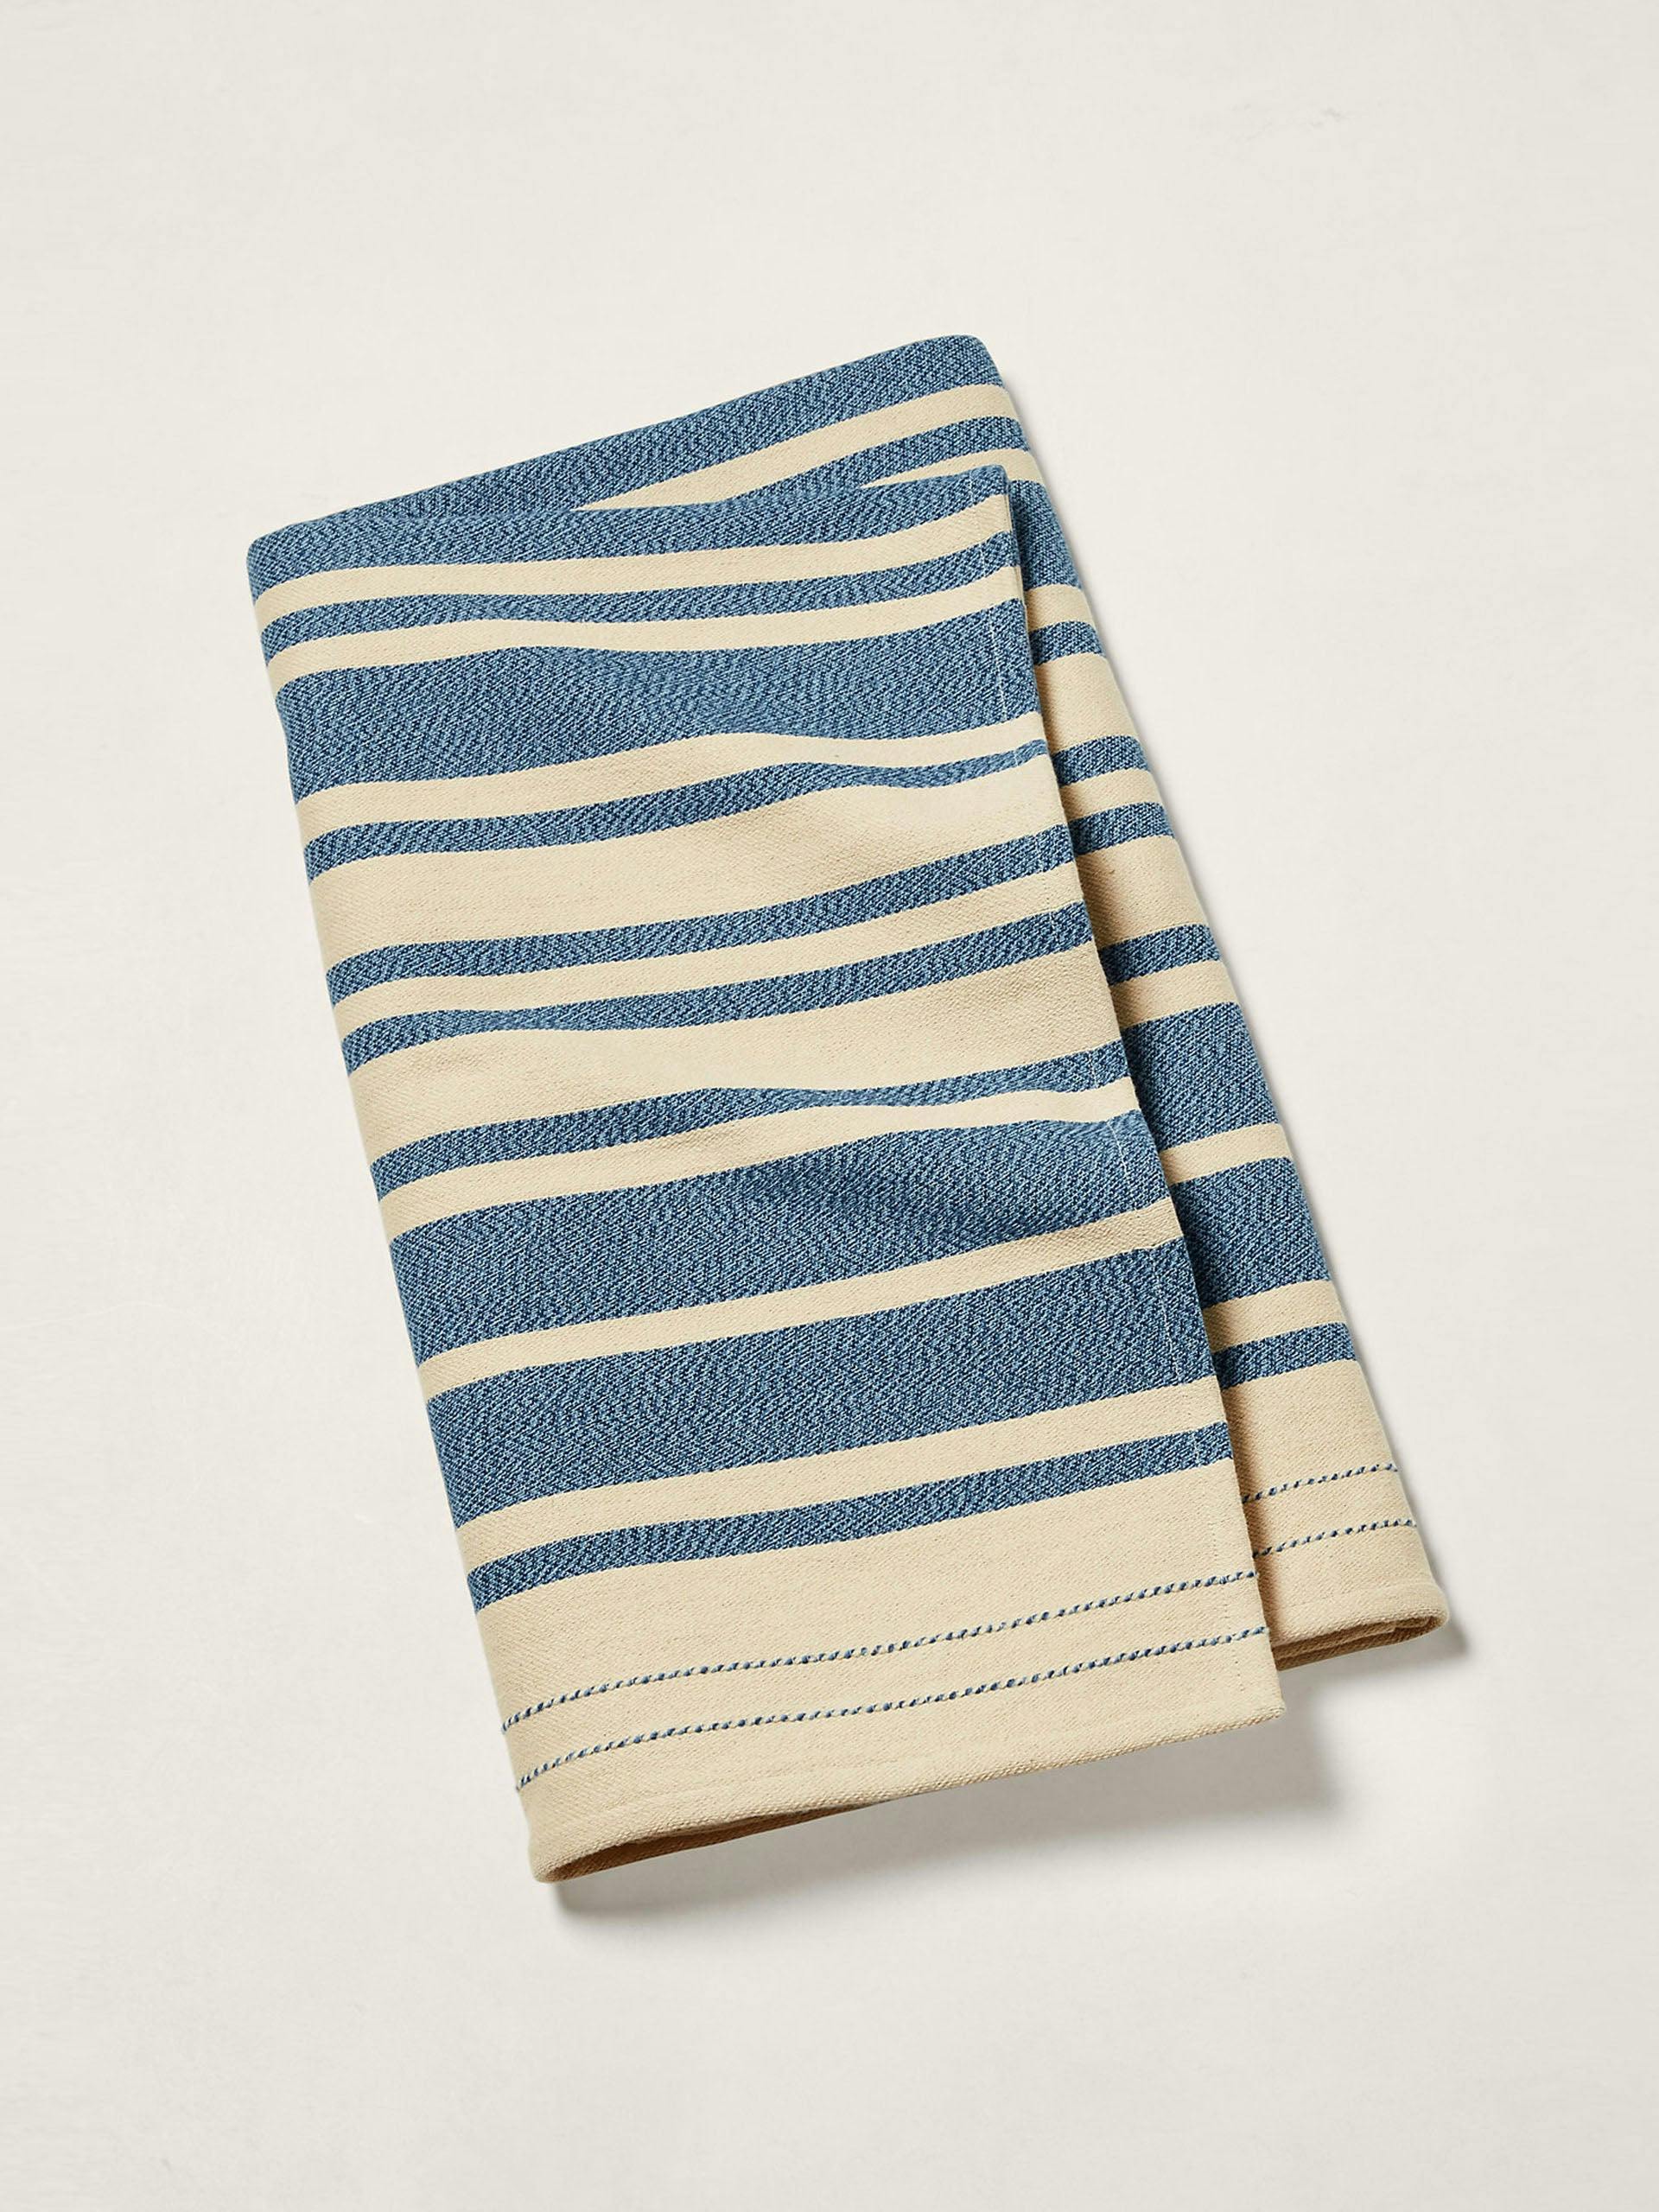 Blue and beige throw blanket